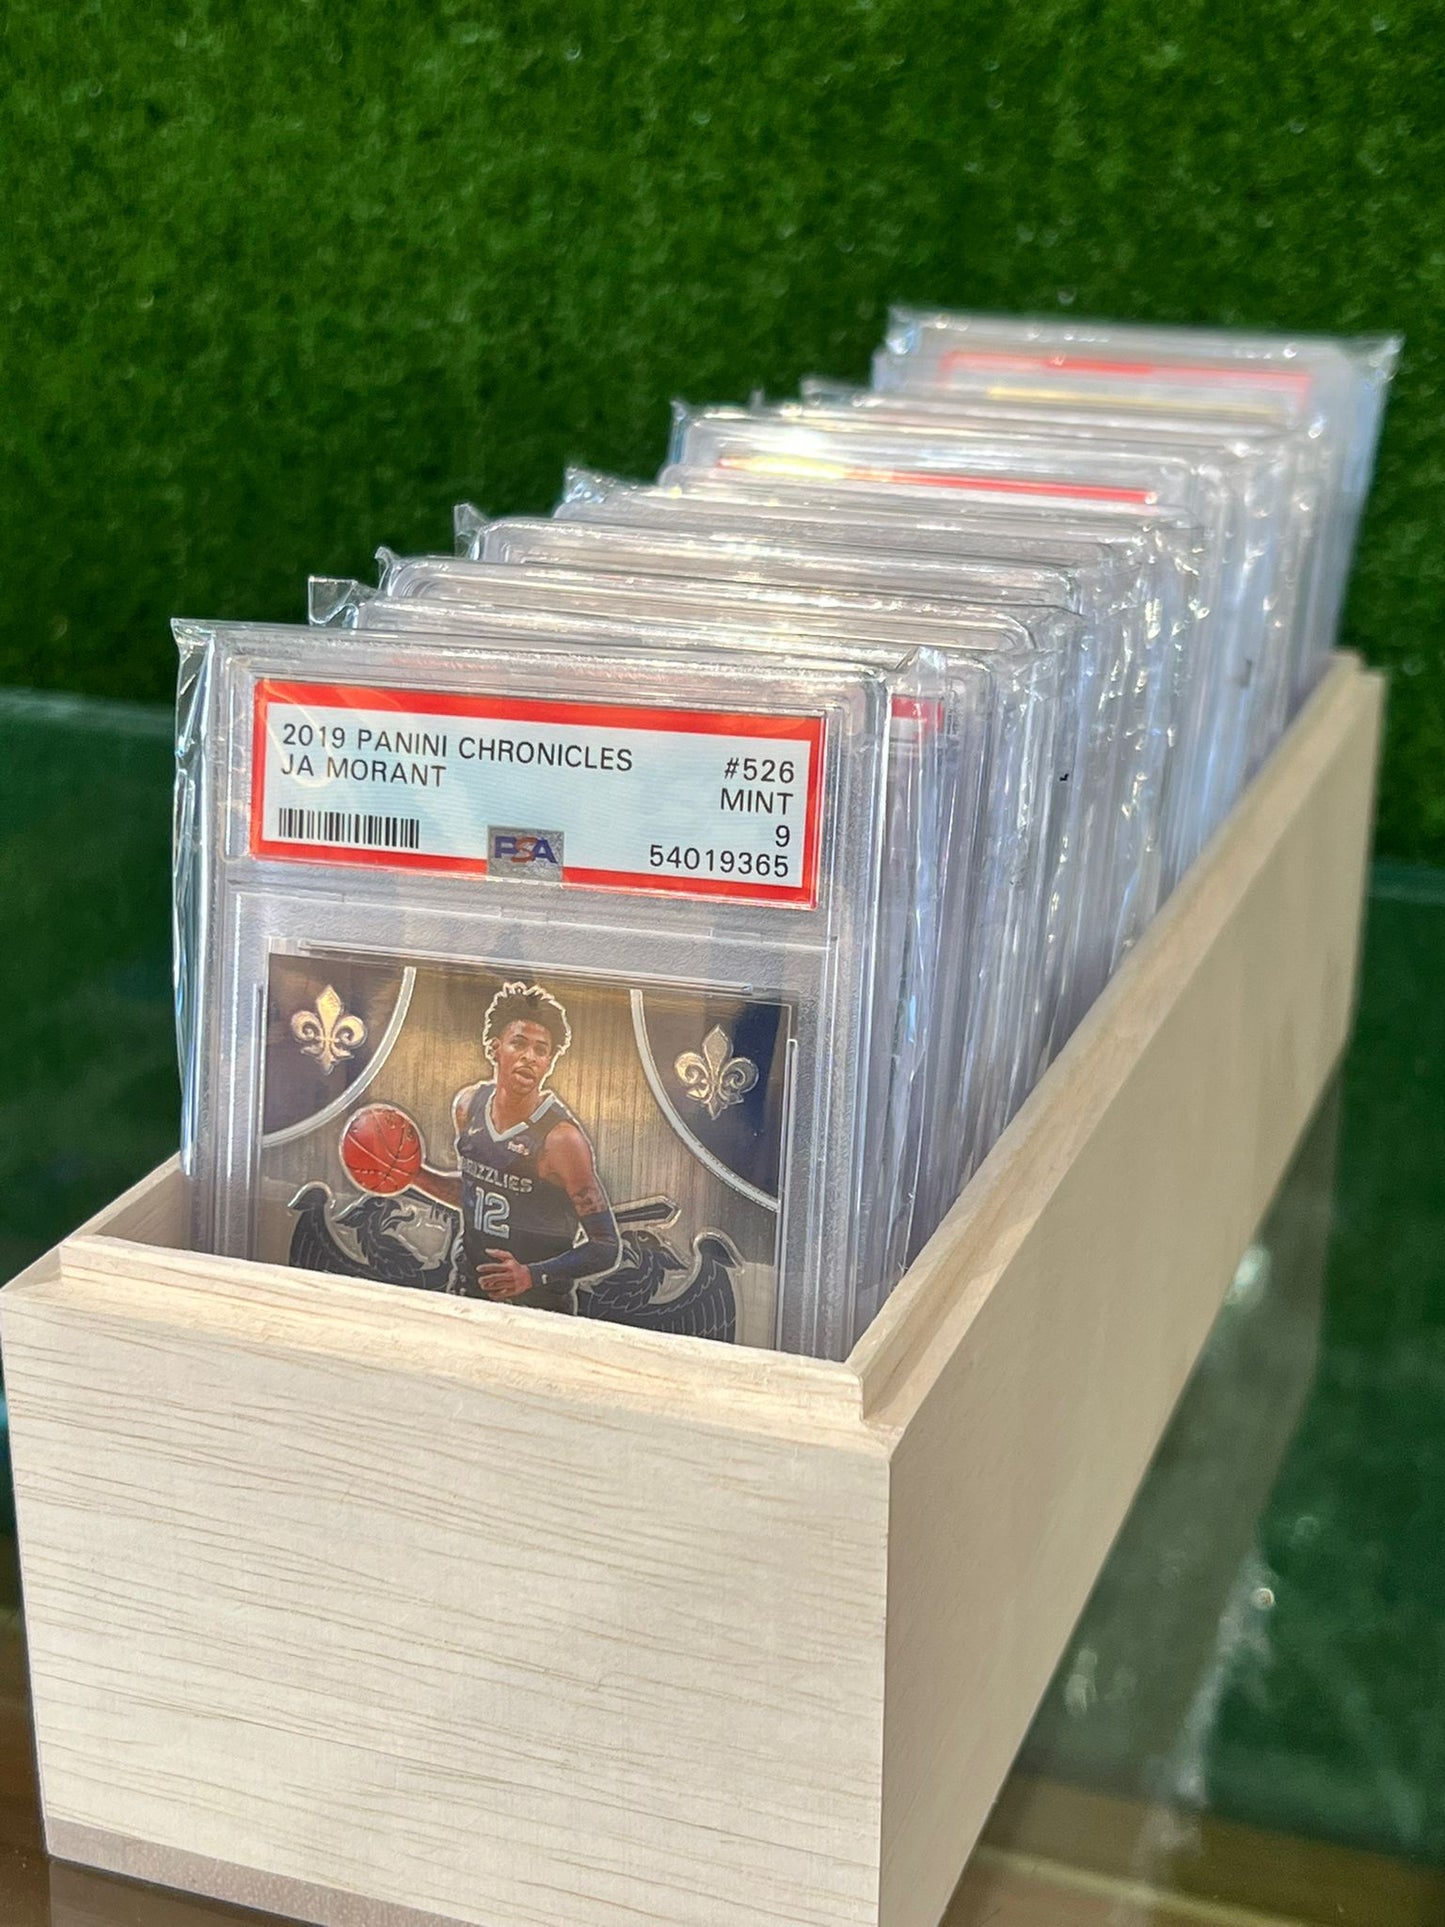 NBA $60 Slab lucky-pull graded card game